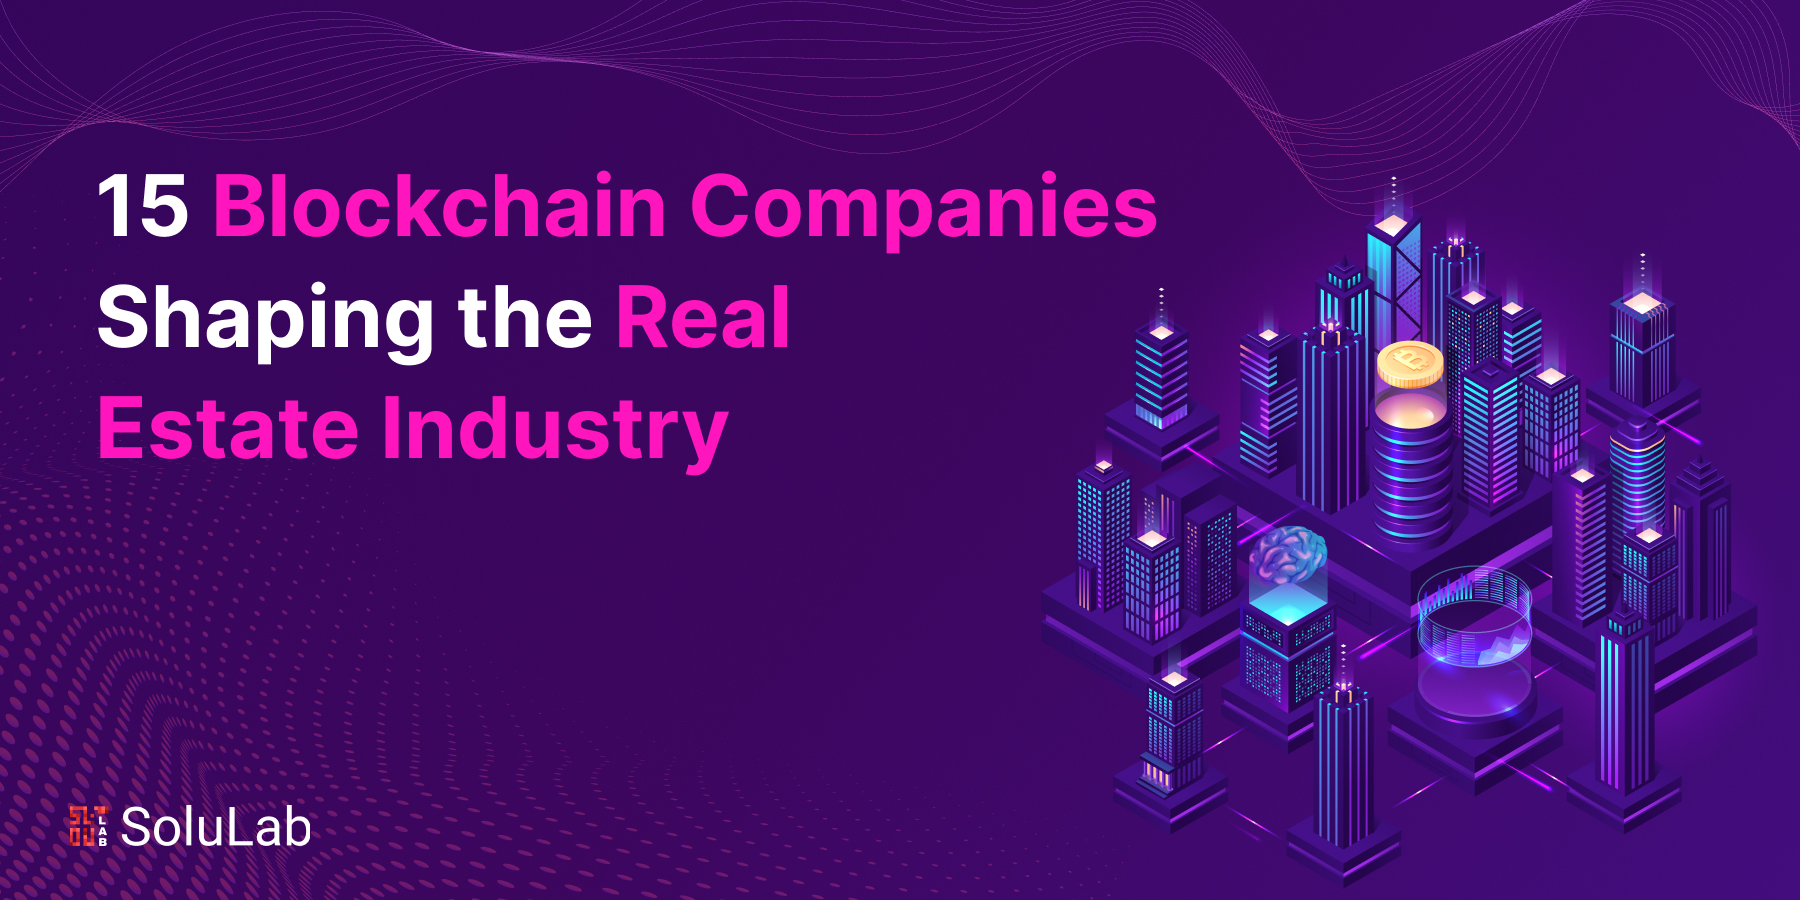 15 Blockchain Companies Shaping the Real Estate Industry